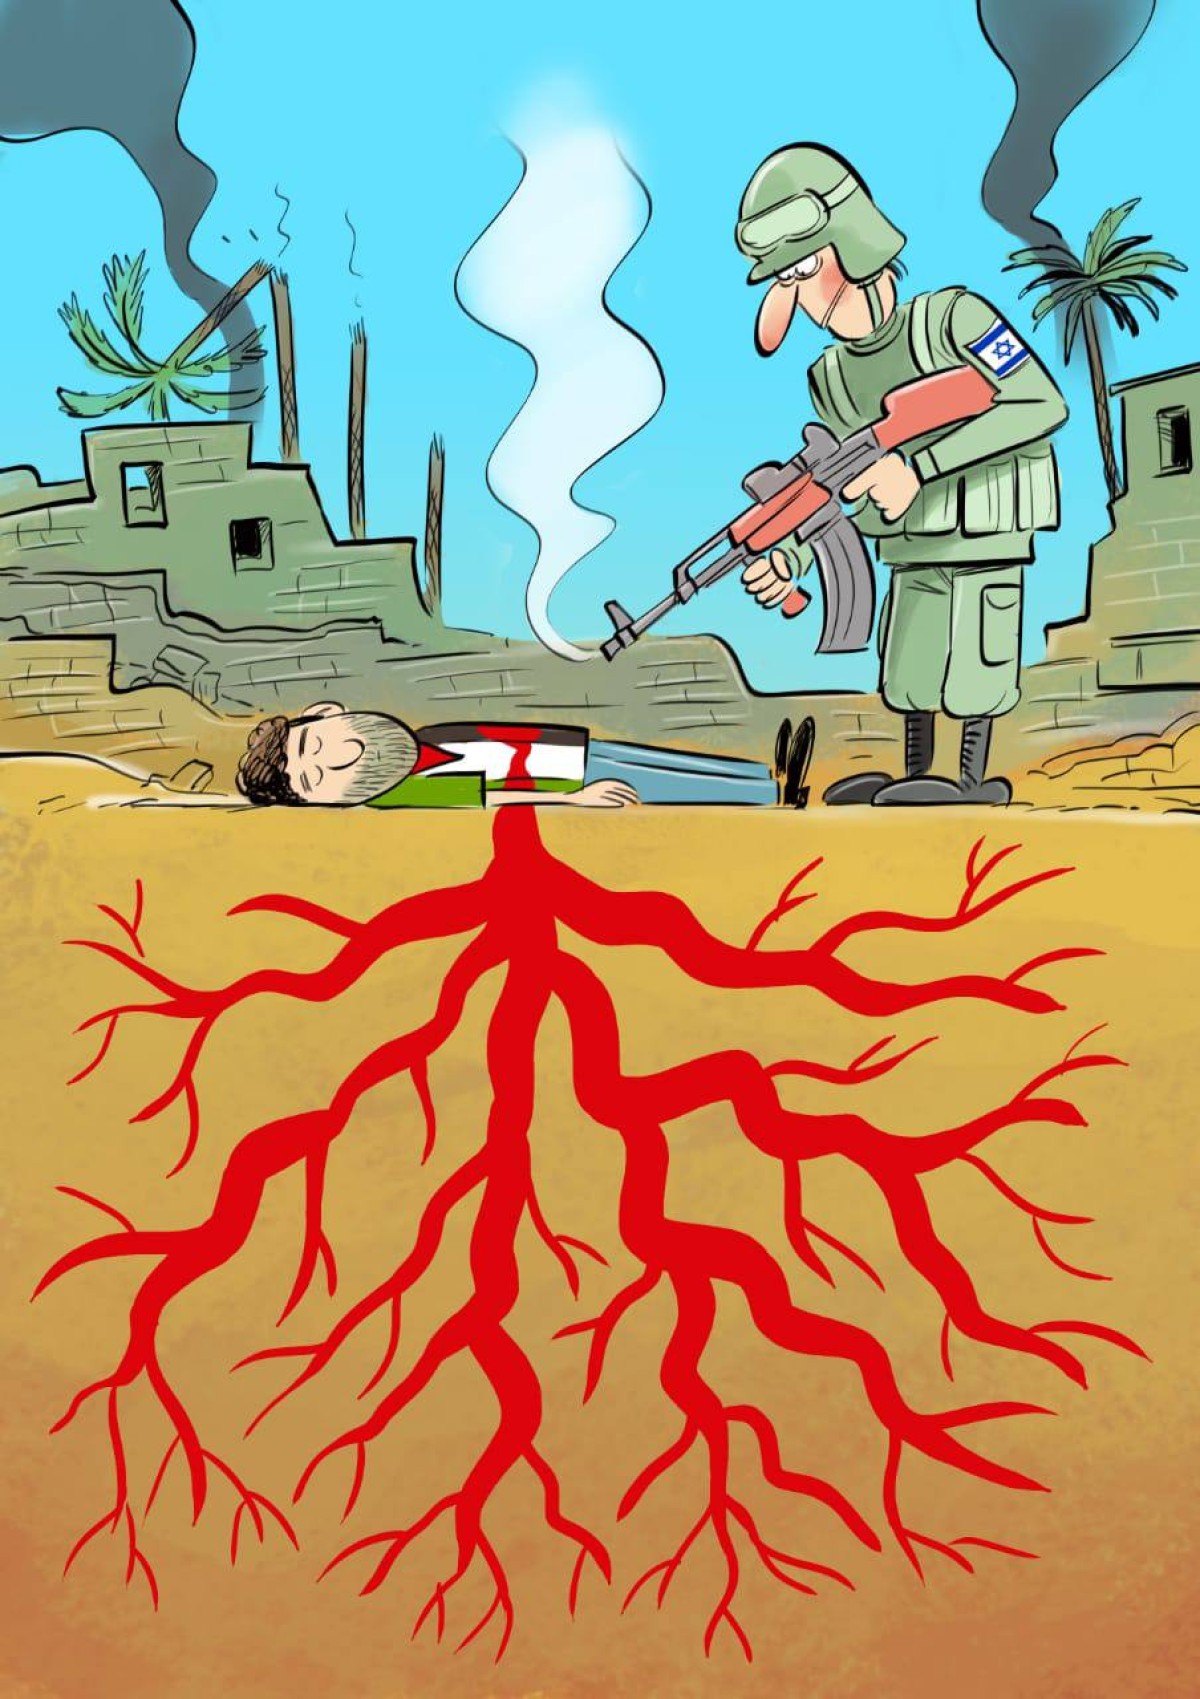 The bloodthirsty army of the Zionist regime against the defenseless Palestinians